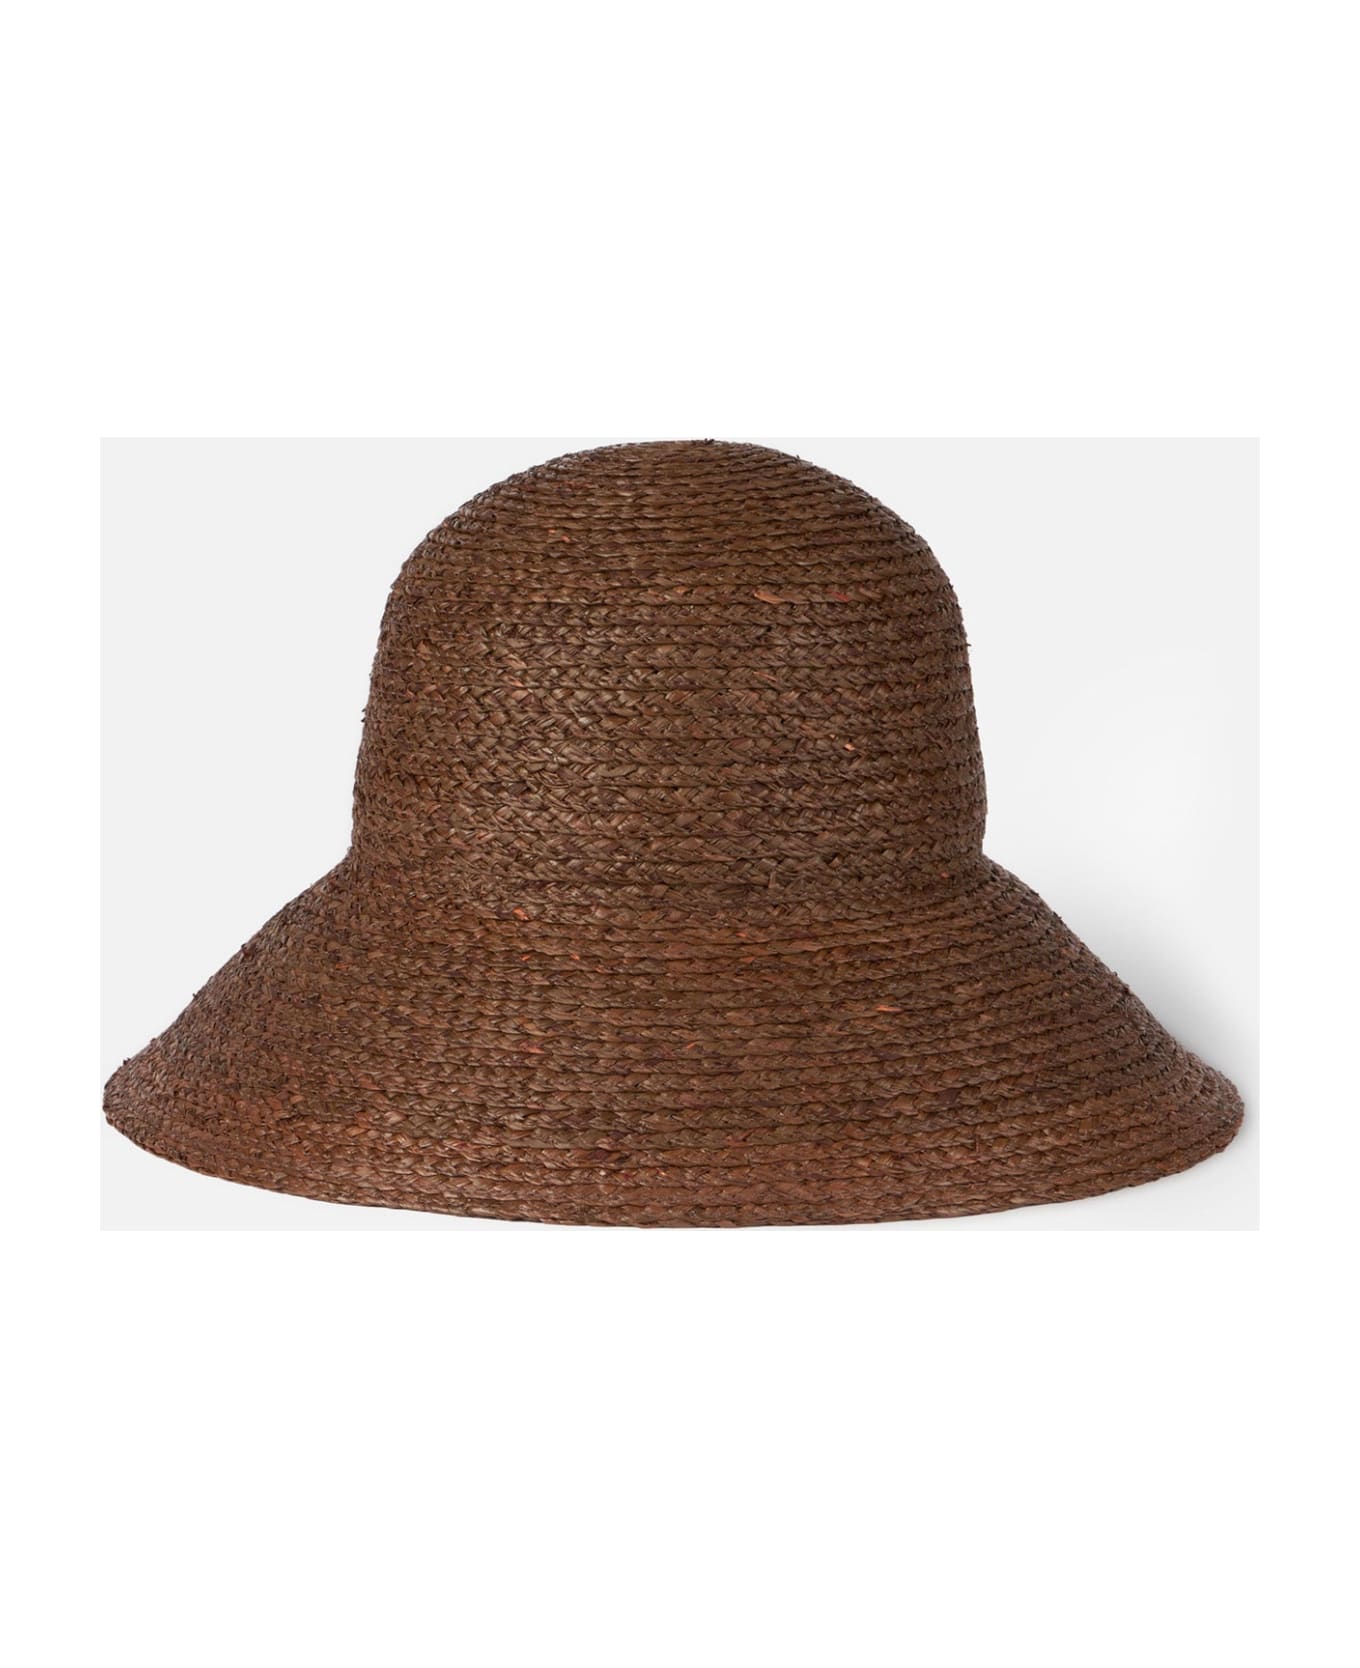 MC2 Saint Barth Woman Straw Light Brown Bucket With Front Embroidery - BROWN